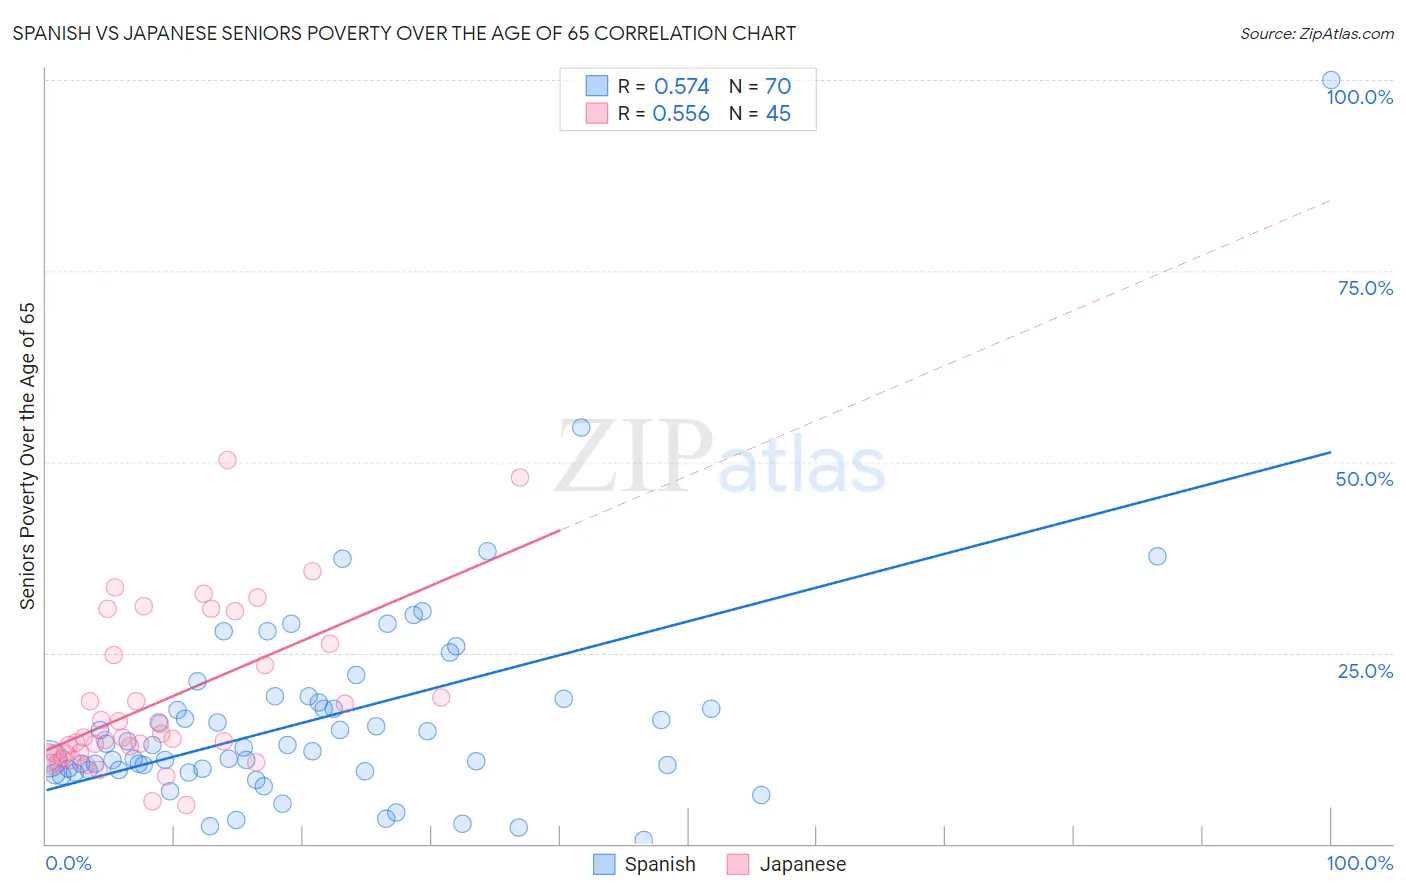 Spanish vs Japanese Seniors Poverty Over the Age of 65